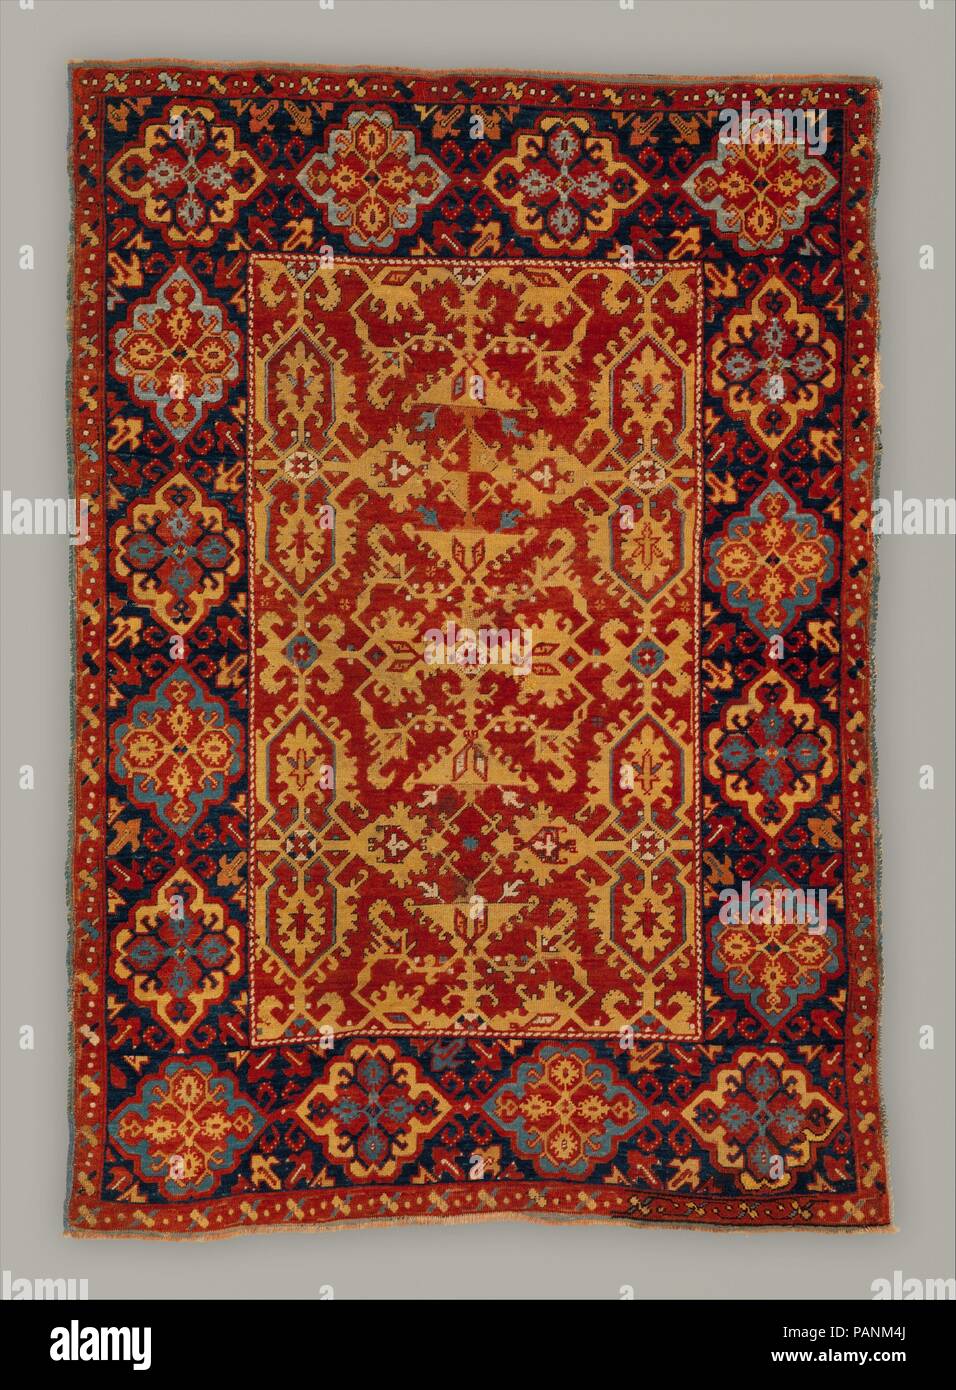 Wool Classic Rugs In Red 537R A Traditional Wilton Pile Rug In 6 Sizes 